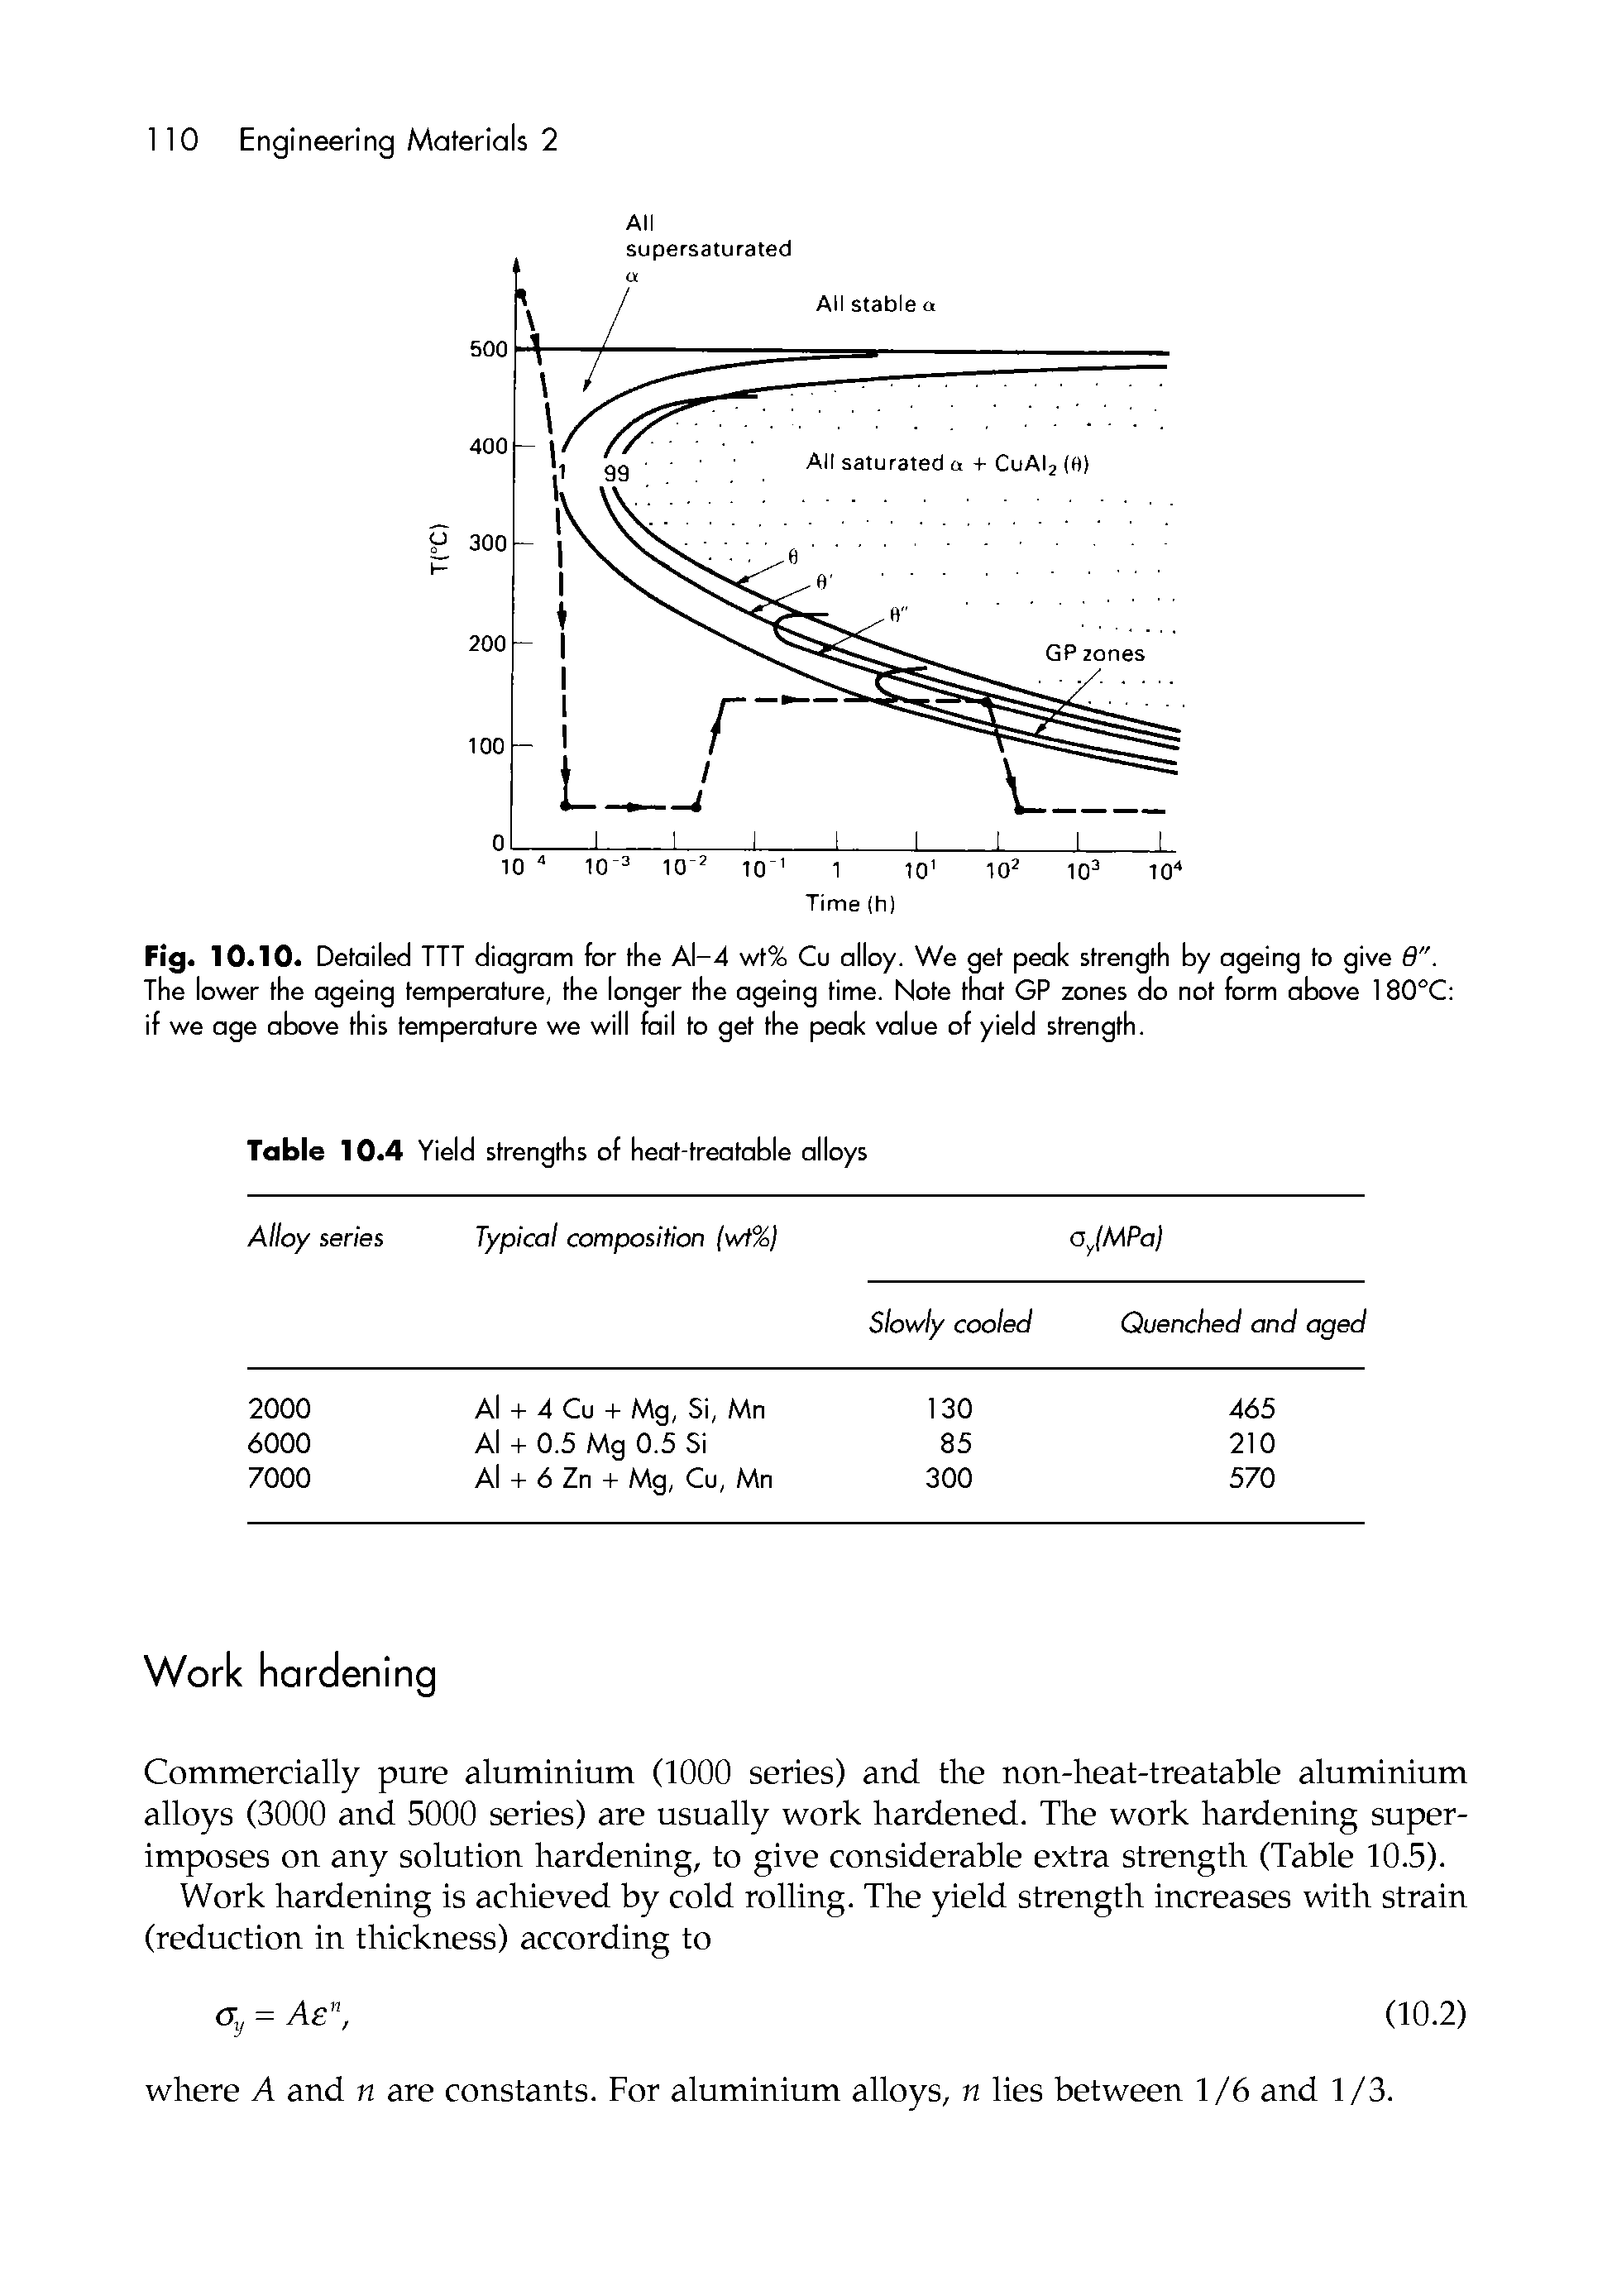 Fig. 10.10. Detailed TTT diagram for the Al-4 wt% Cu alloy. We get peak strength by ageing to give 8". The lower the ageing temperature, the longer the ageing time. Note that GP zones do not form above 1 80°C if we age above this temperature we will foil to get the peak value of yield strength.